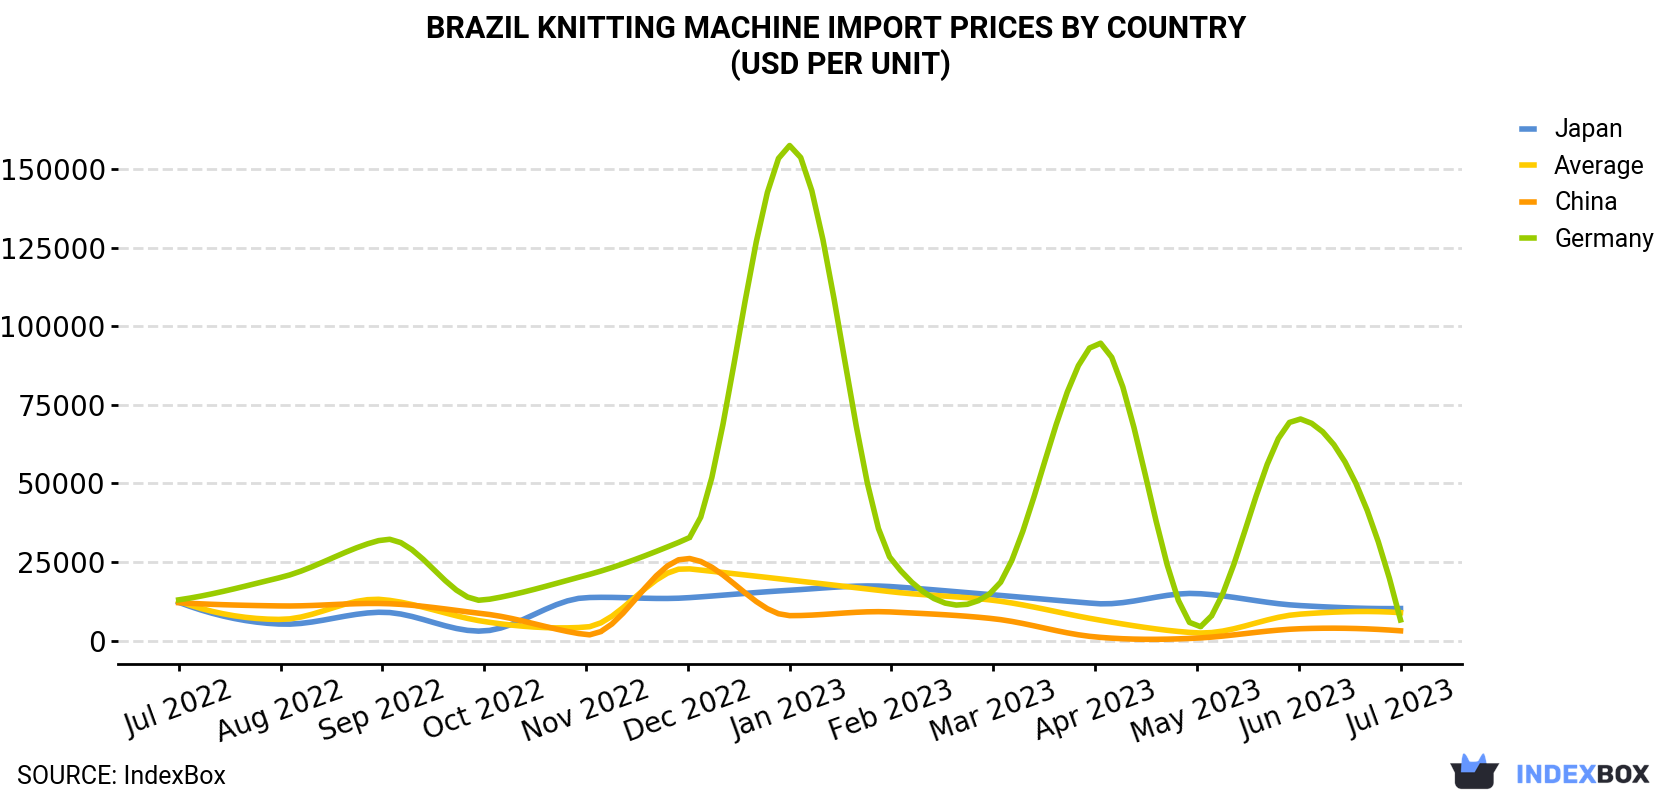 Brazil Knitting Machine Import Prices By Country (USD Per Unit)